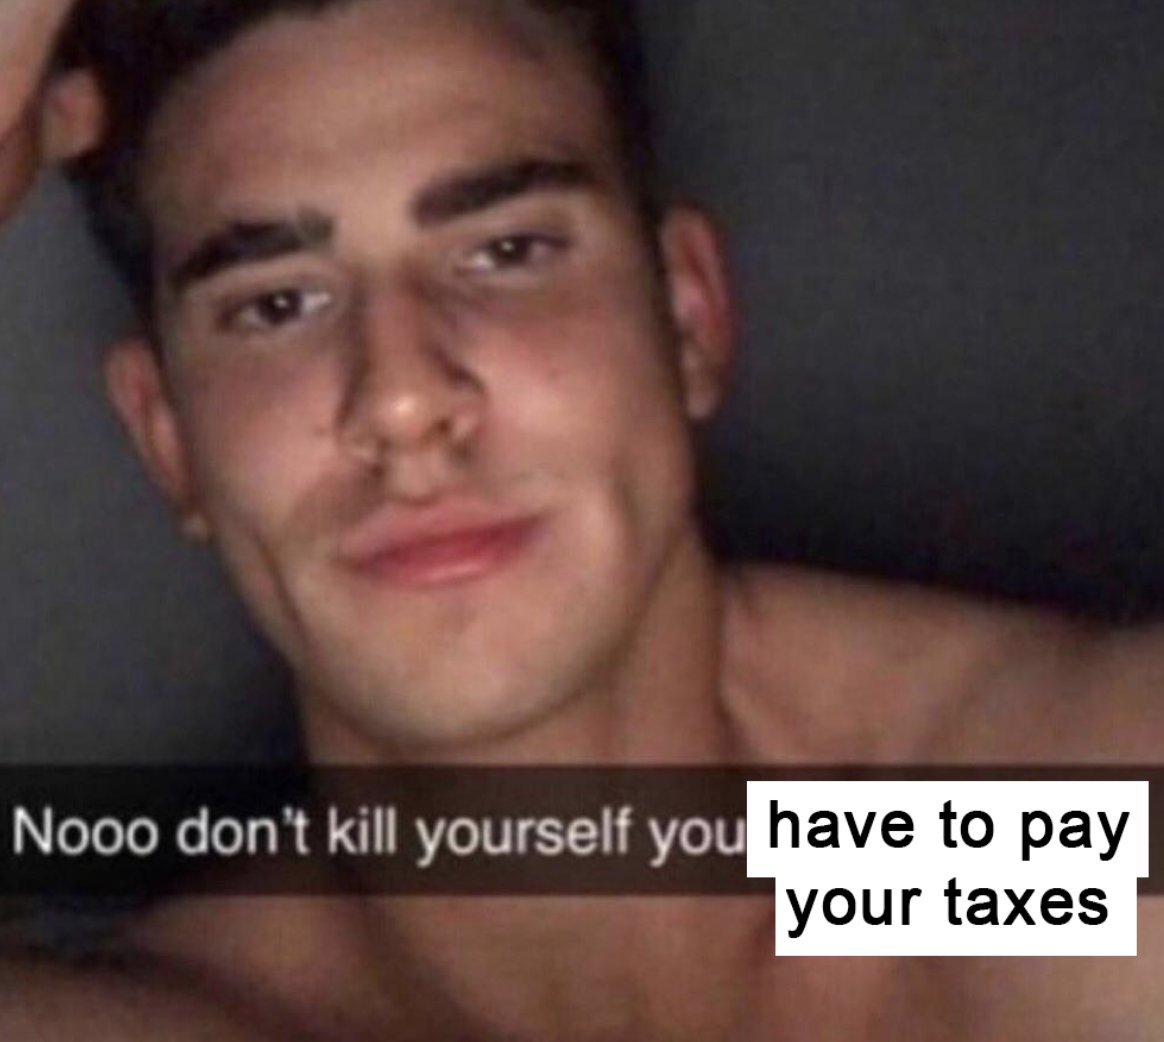 happy tax day to all who celebrate!! https://t.co/qYJTDdhcDf